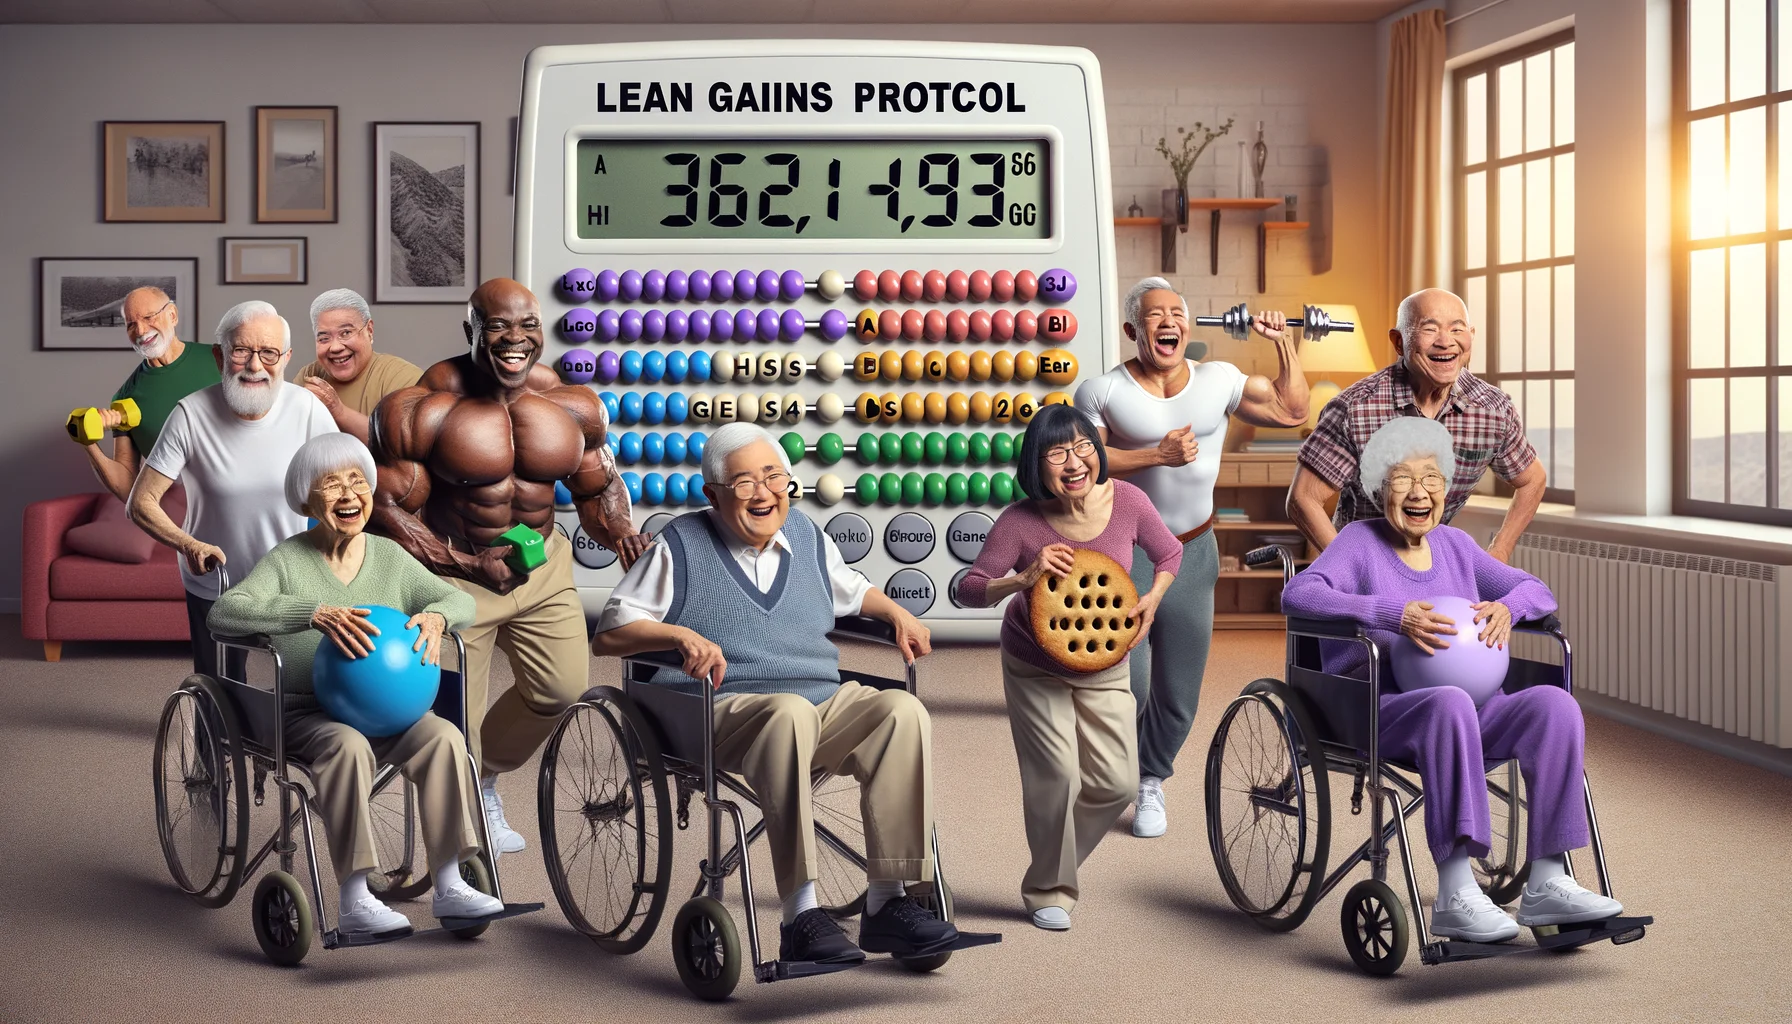 Create a lighthearted and humorous image showcasing the concept of 'lean gains protocol' in an elderly context. Picture an old-age home setting where diverse seniors, Caucasian, Hispanic, Black, Middle-Eastern, South Asian, and White, of both genders, are humorously involved in a fitness milieu. They could be counting calories on an oversized abacus, lifting weight-shaped cookies, doing yoga with their walkers, or running a fun race on their wheelchairs, all in an effort to adhere to the lean gains protocol. The image should have a realistic feel to it while maintaining the funny side of the scenario.